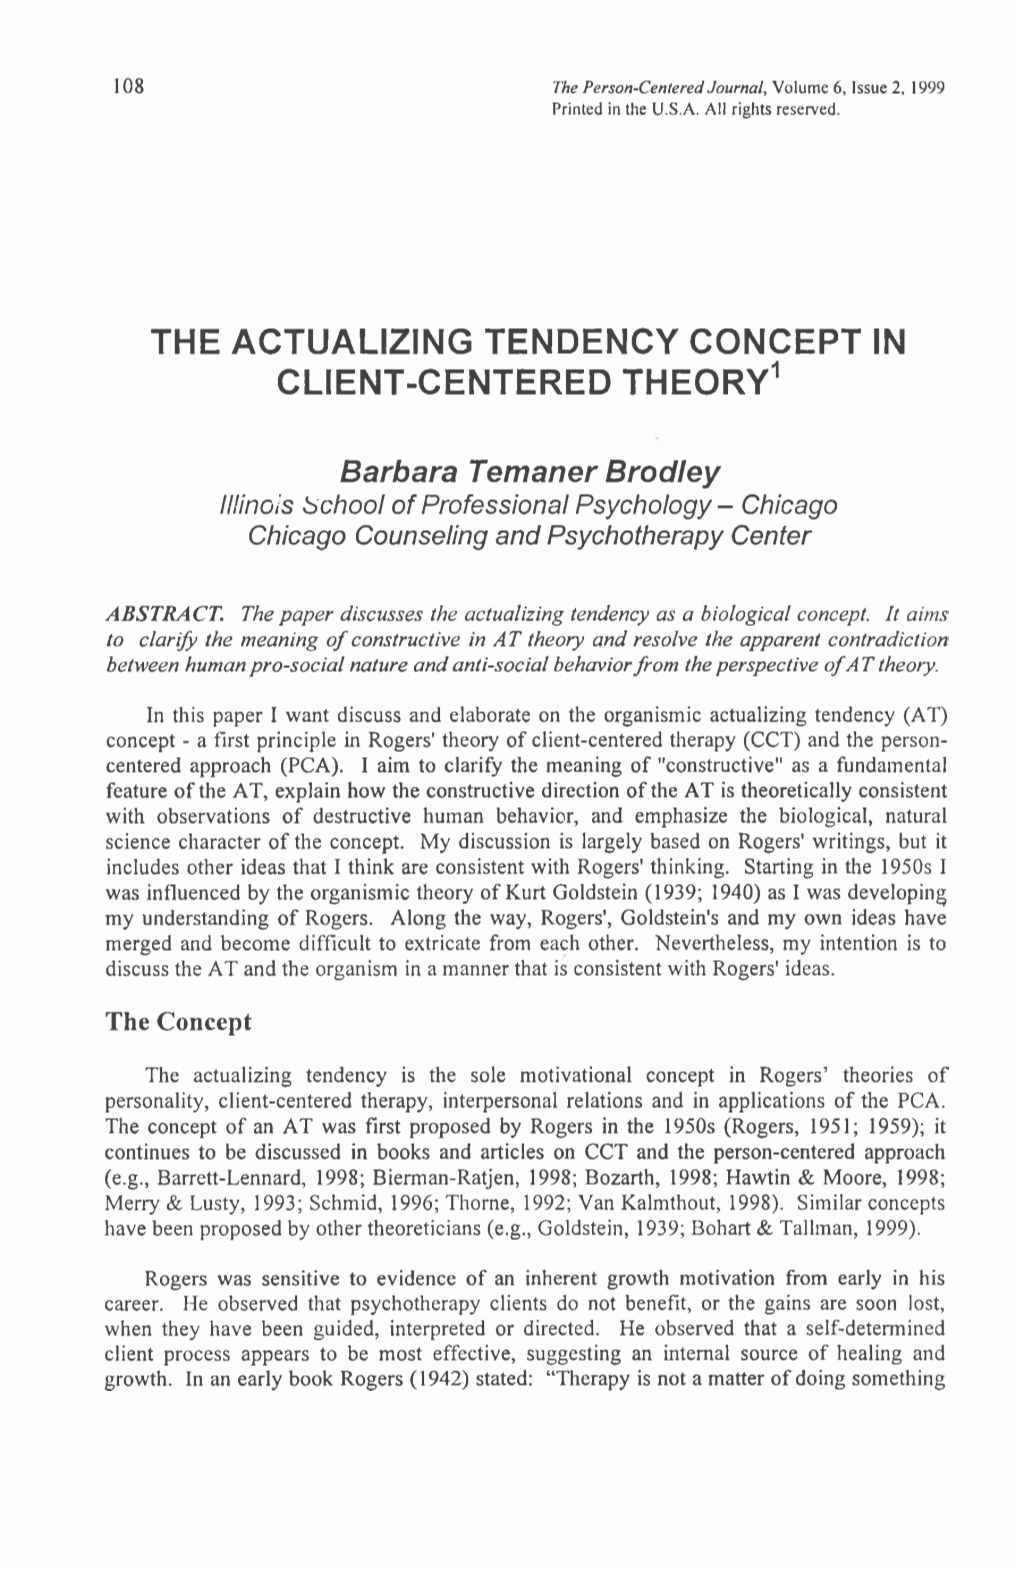 THE ACTUALIZING TENDENCY CONCEPT in CLIENT-CENTERED Theoryl